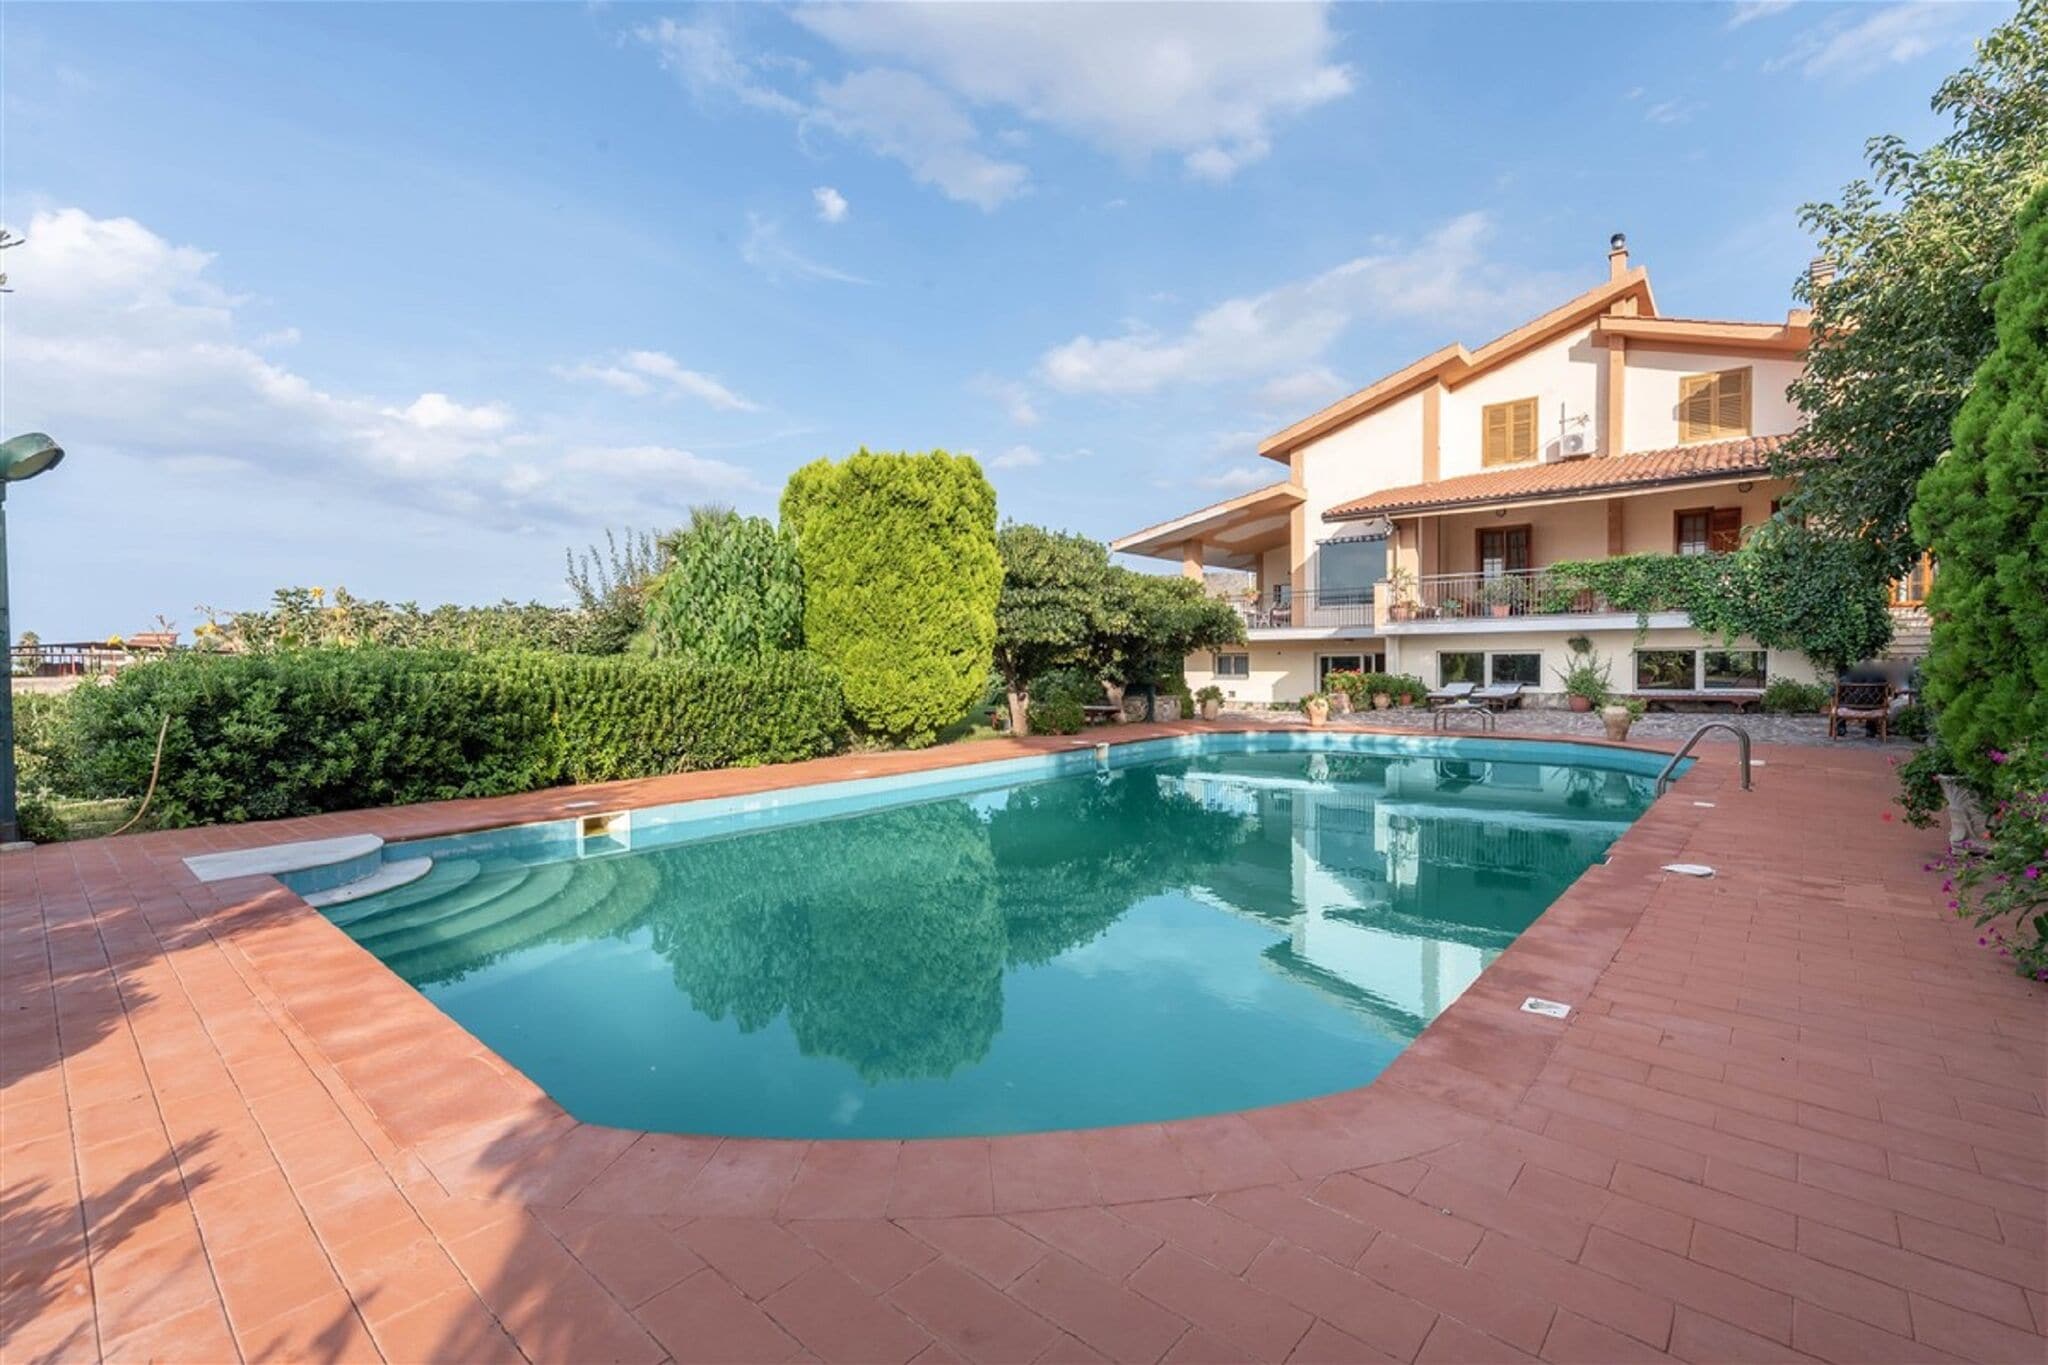 Splendid Villa with swimming pool a stone's throw from Palermo